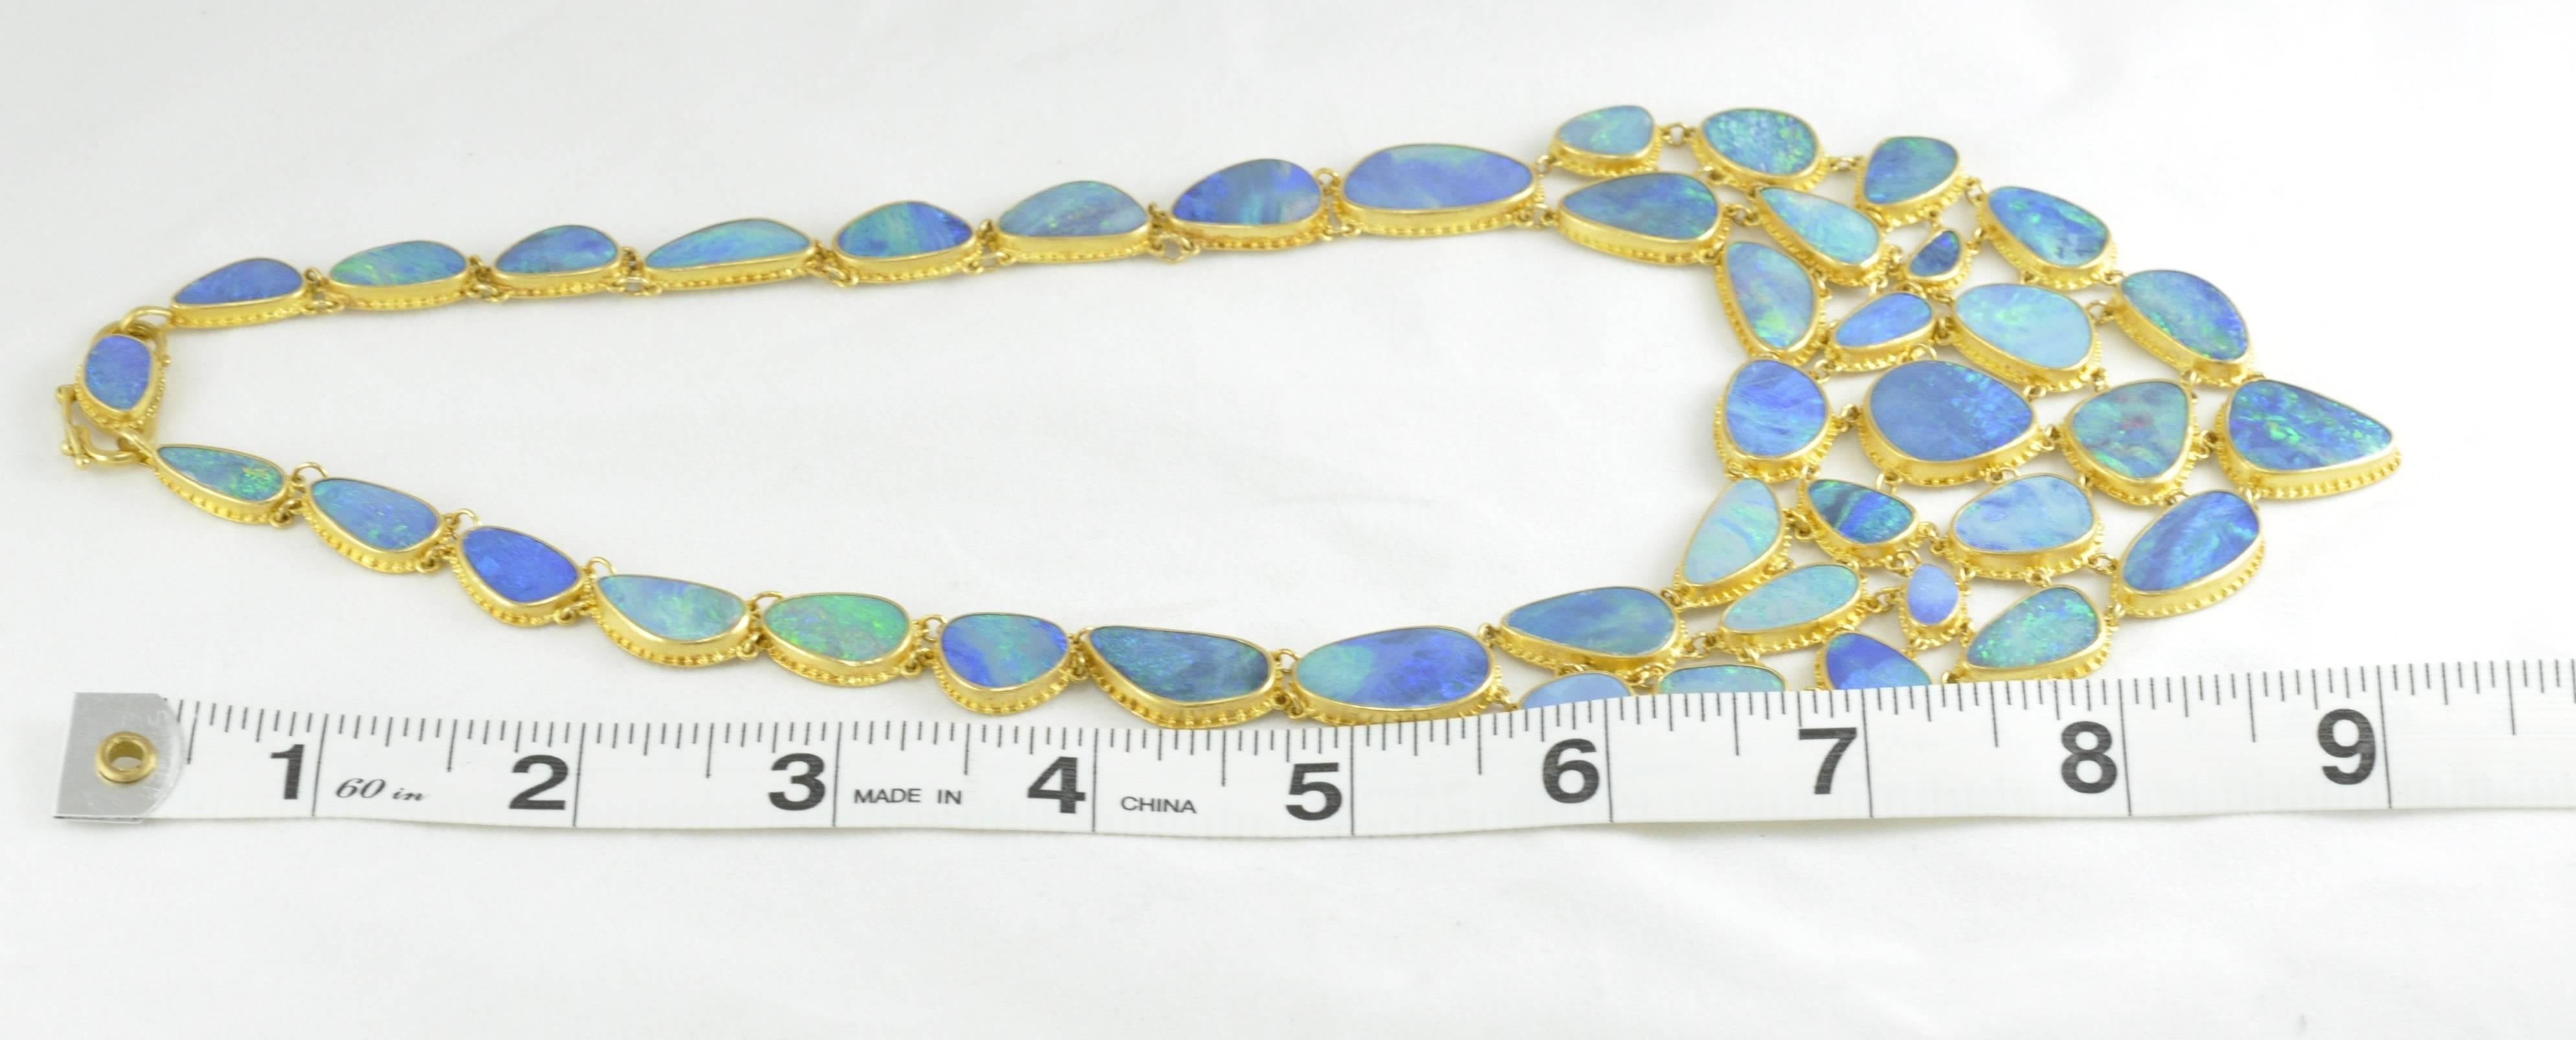 Carolyn Tyler Fishnet Boulder Opal and Gold Necklace. 
22k Gold with 140ct of Black Opal and Natural Ironstone Doublet 
This necklace hangs 17 inches 